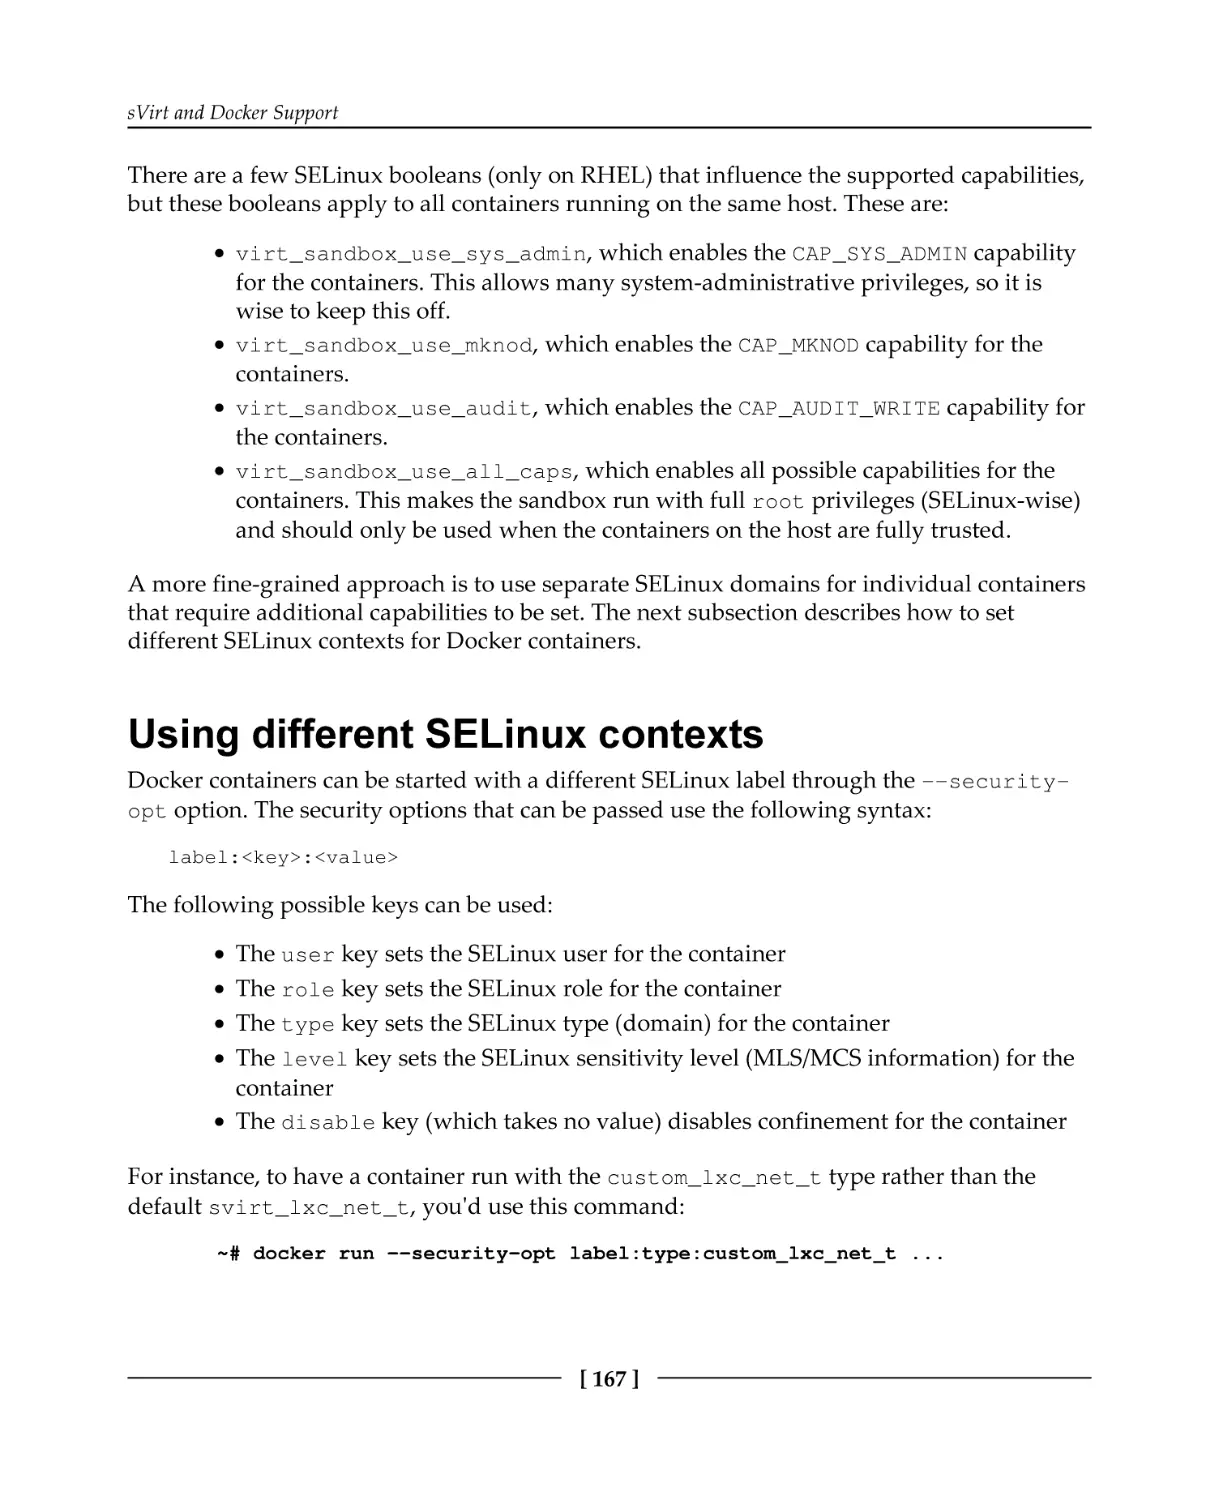 Using different SELinux contexts